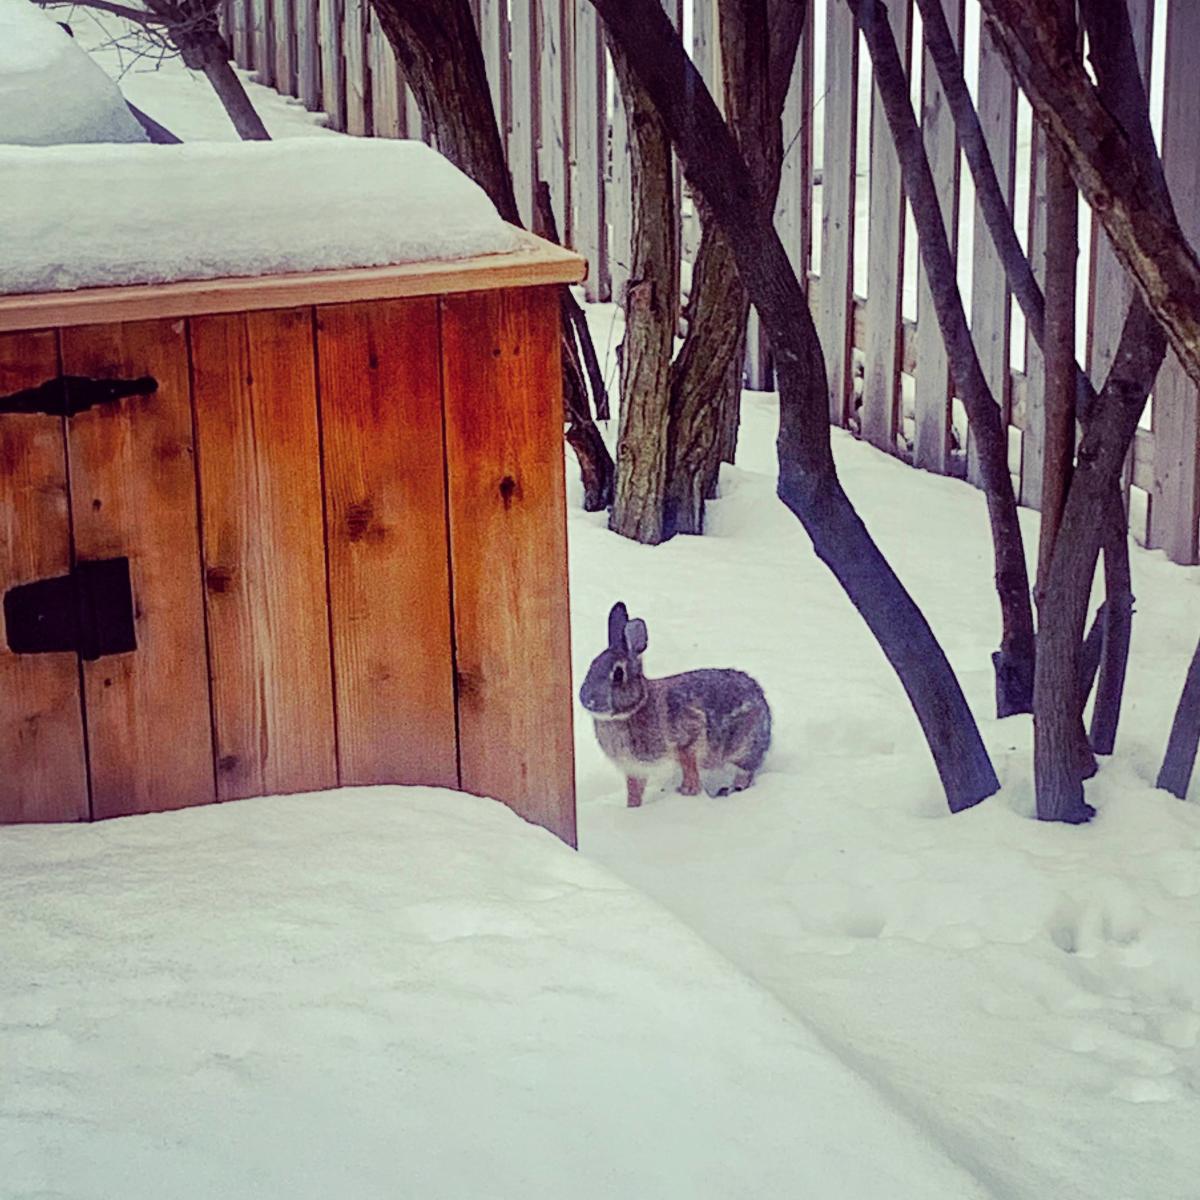 A bunny playing in snow.